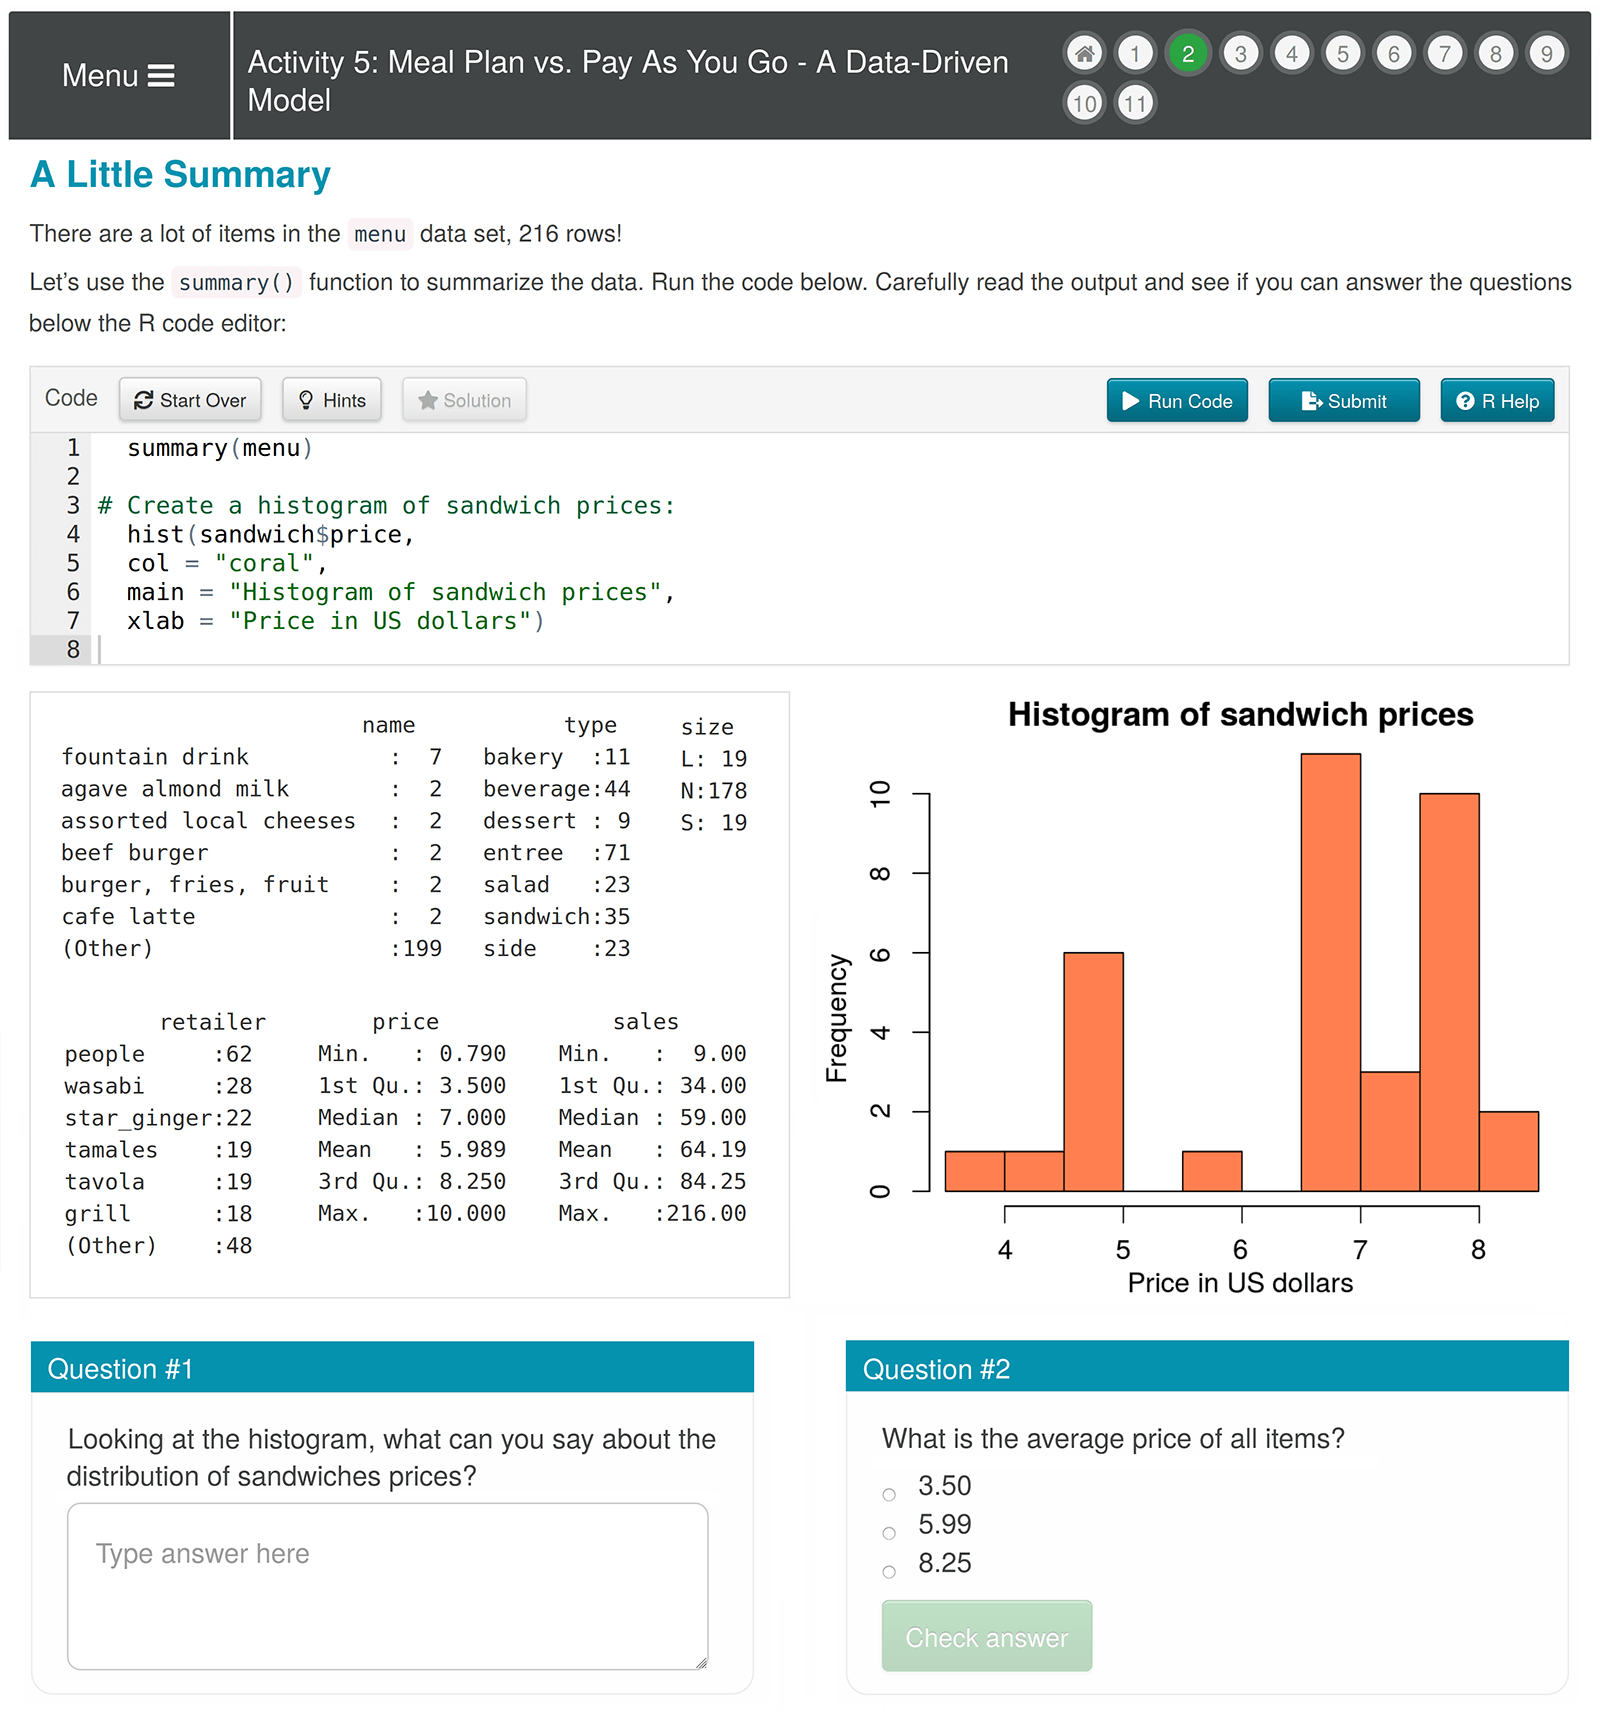 R code snippets and their outputs, including graphs, statistical information tables, and open-ended and multiple-choice questions.